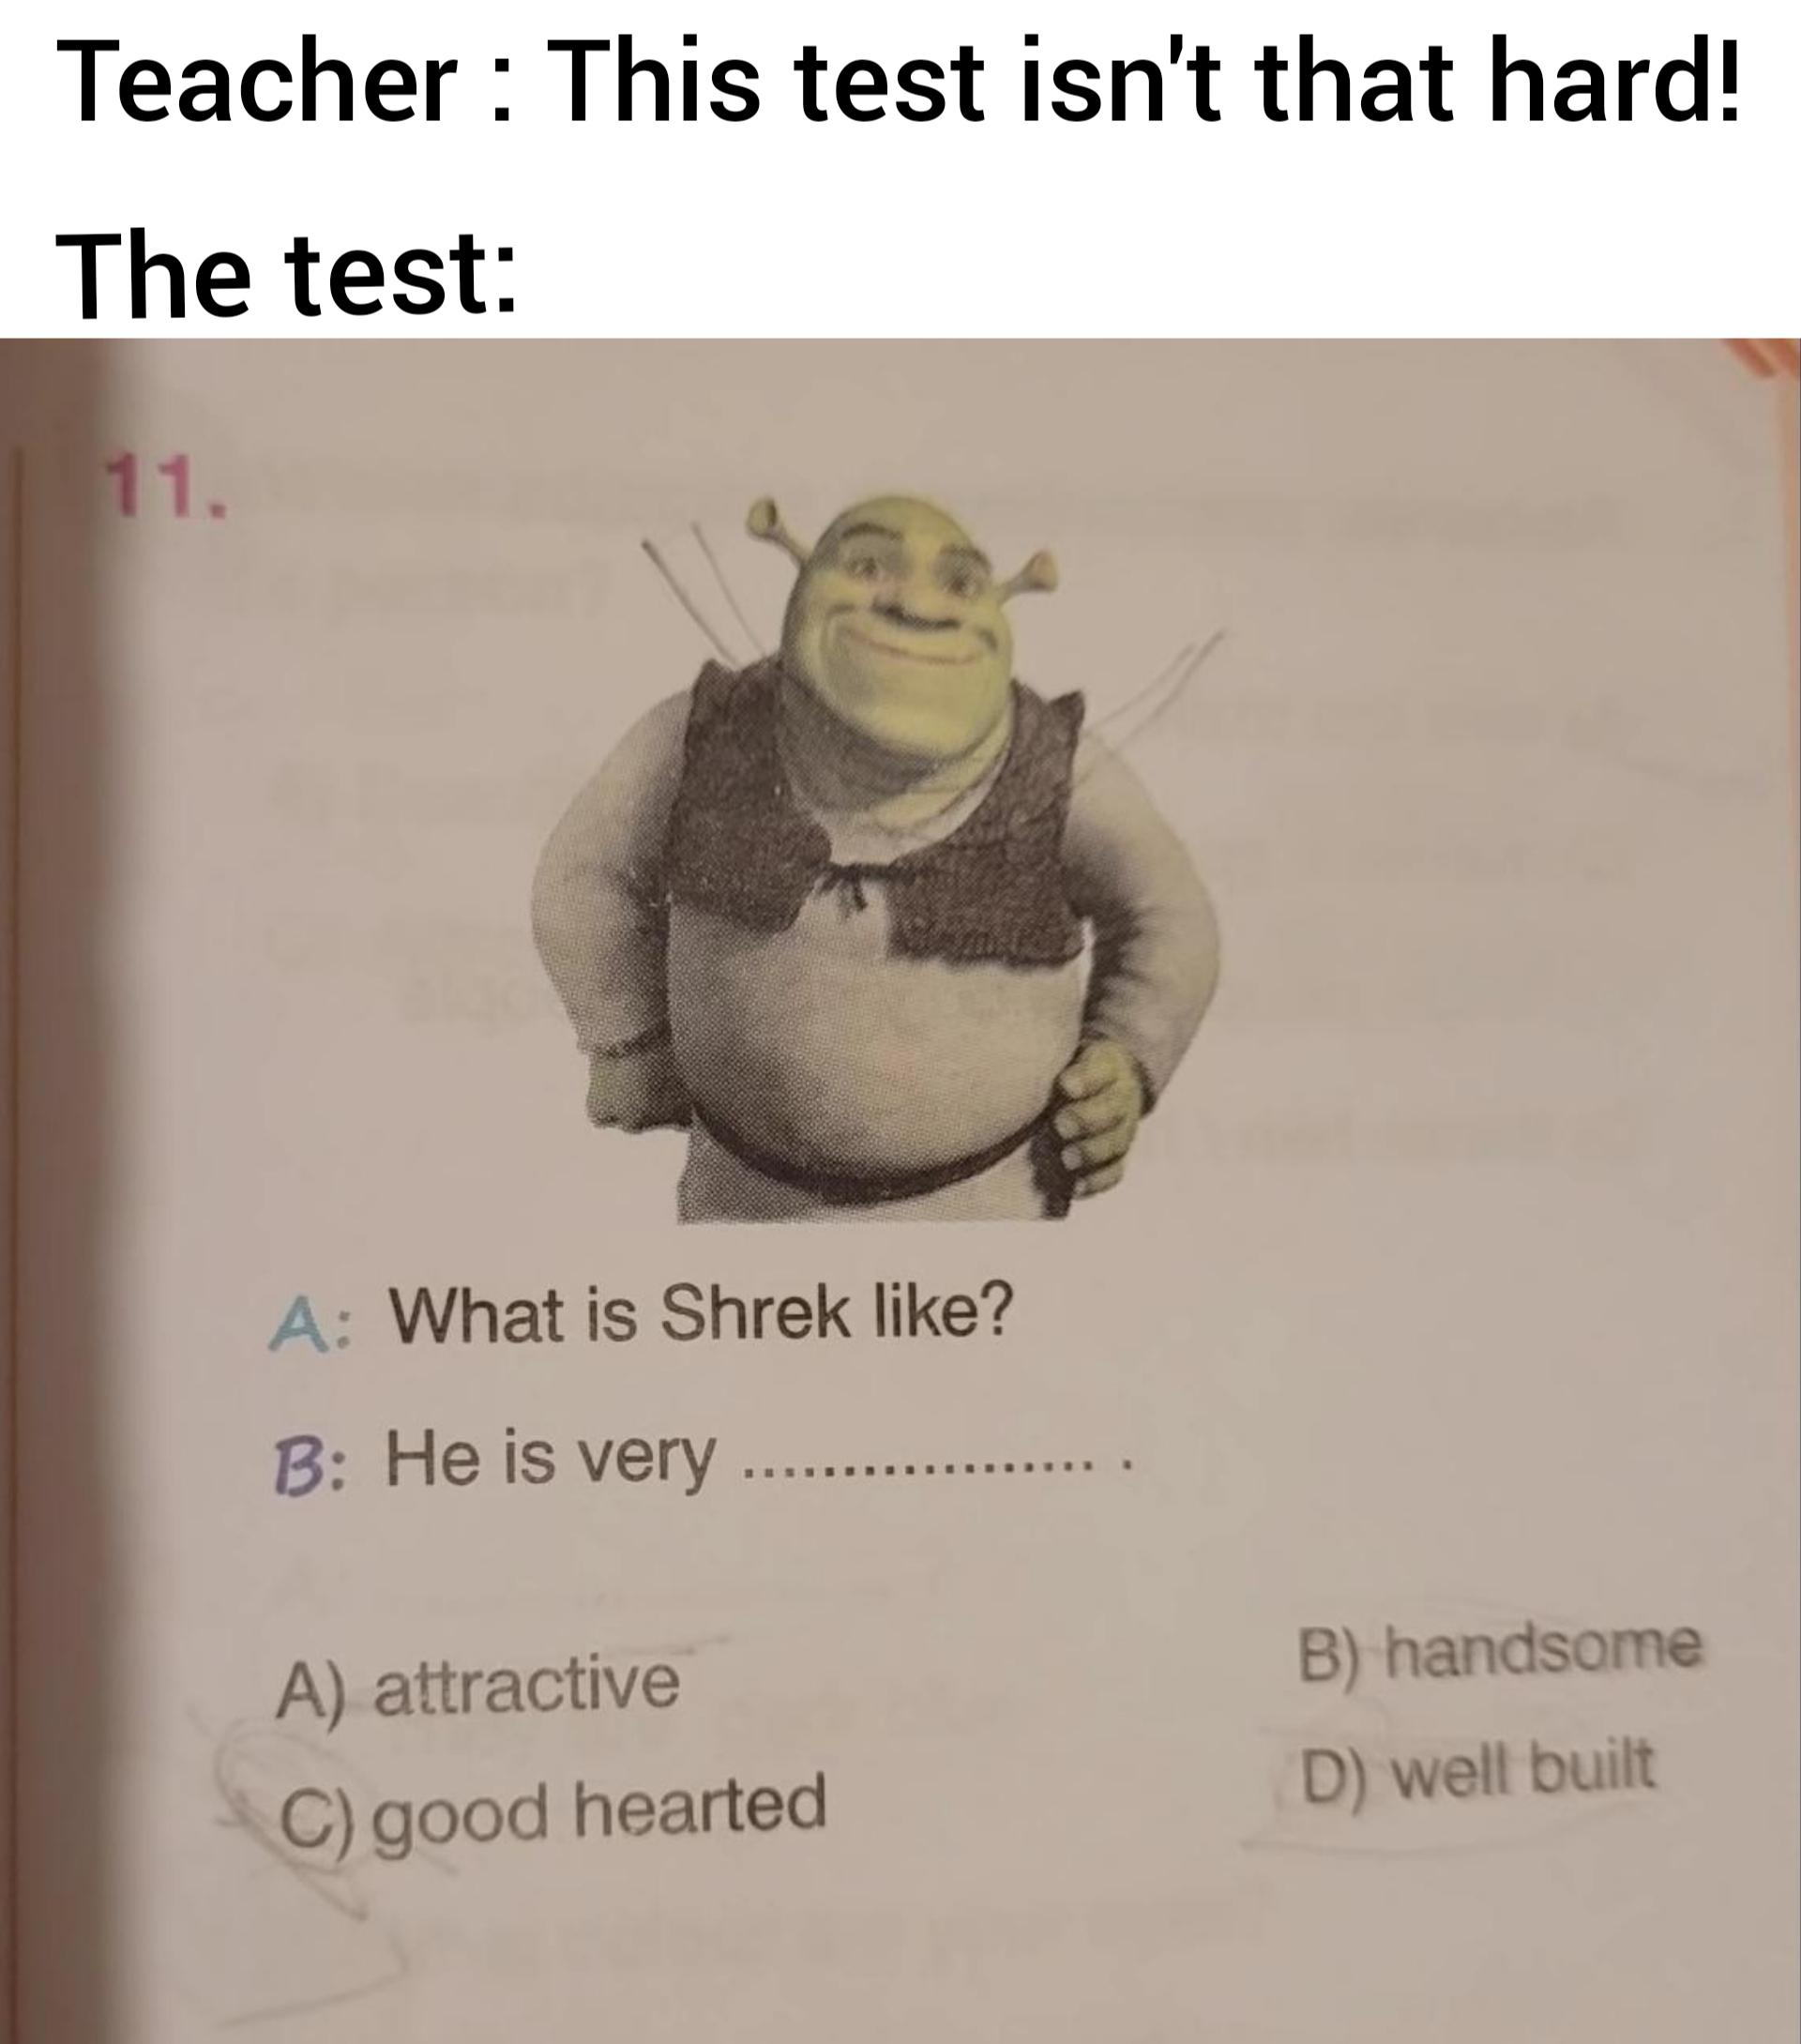 shrek chan - Teacher This test isn't that hard! The test 11. A What is Shrek ? B He is very B handsome A attractive C good hearted D well built